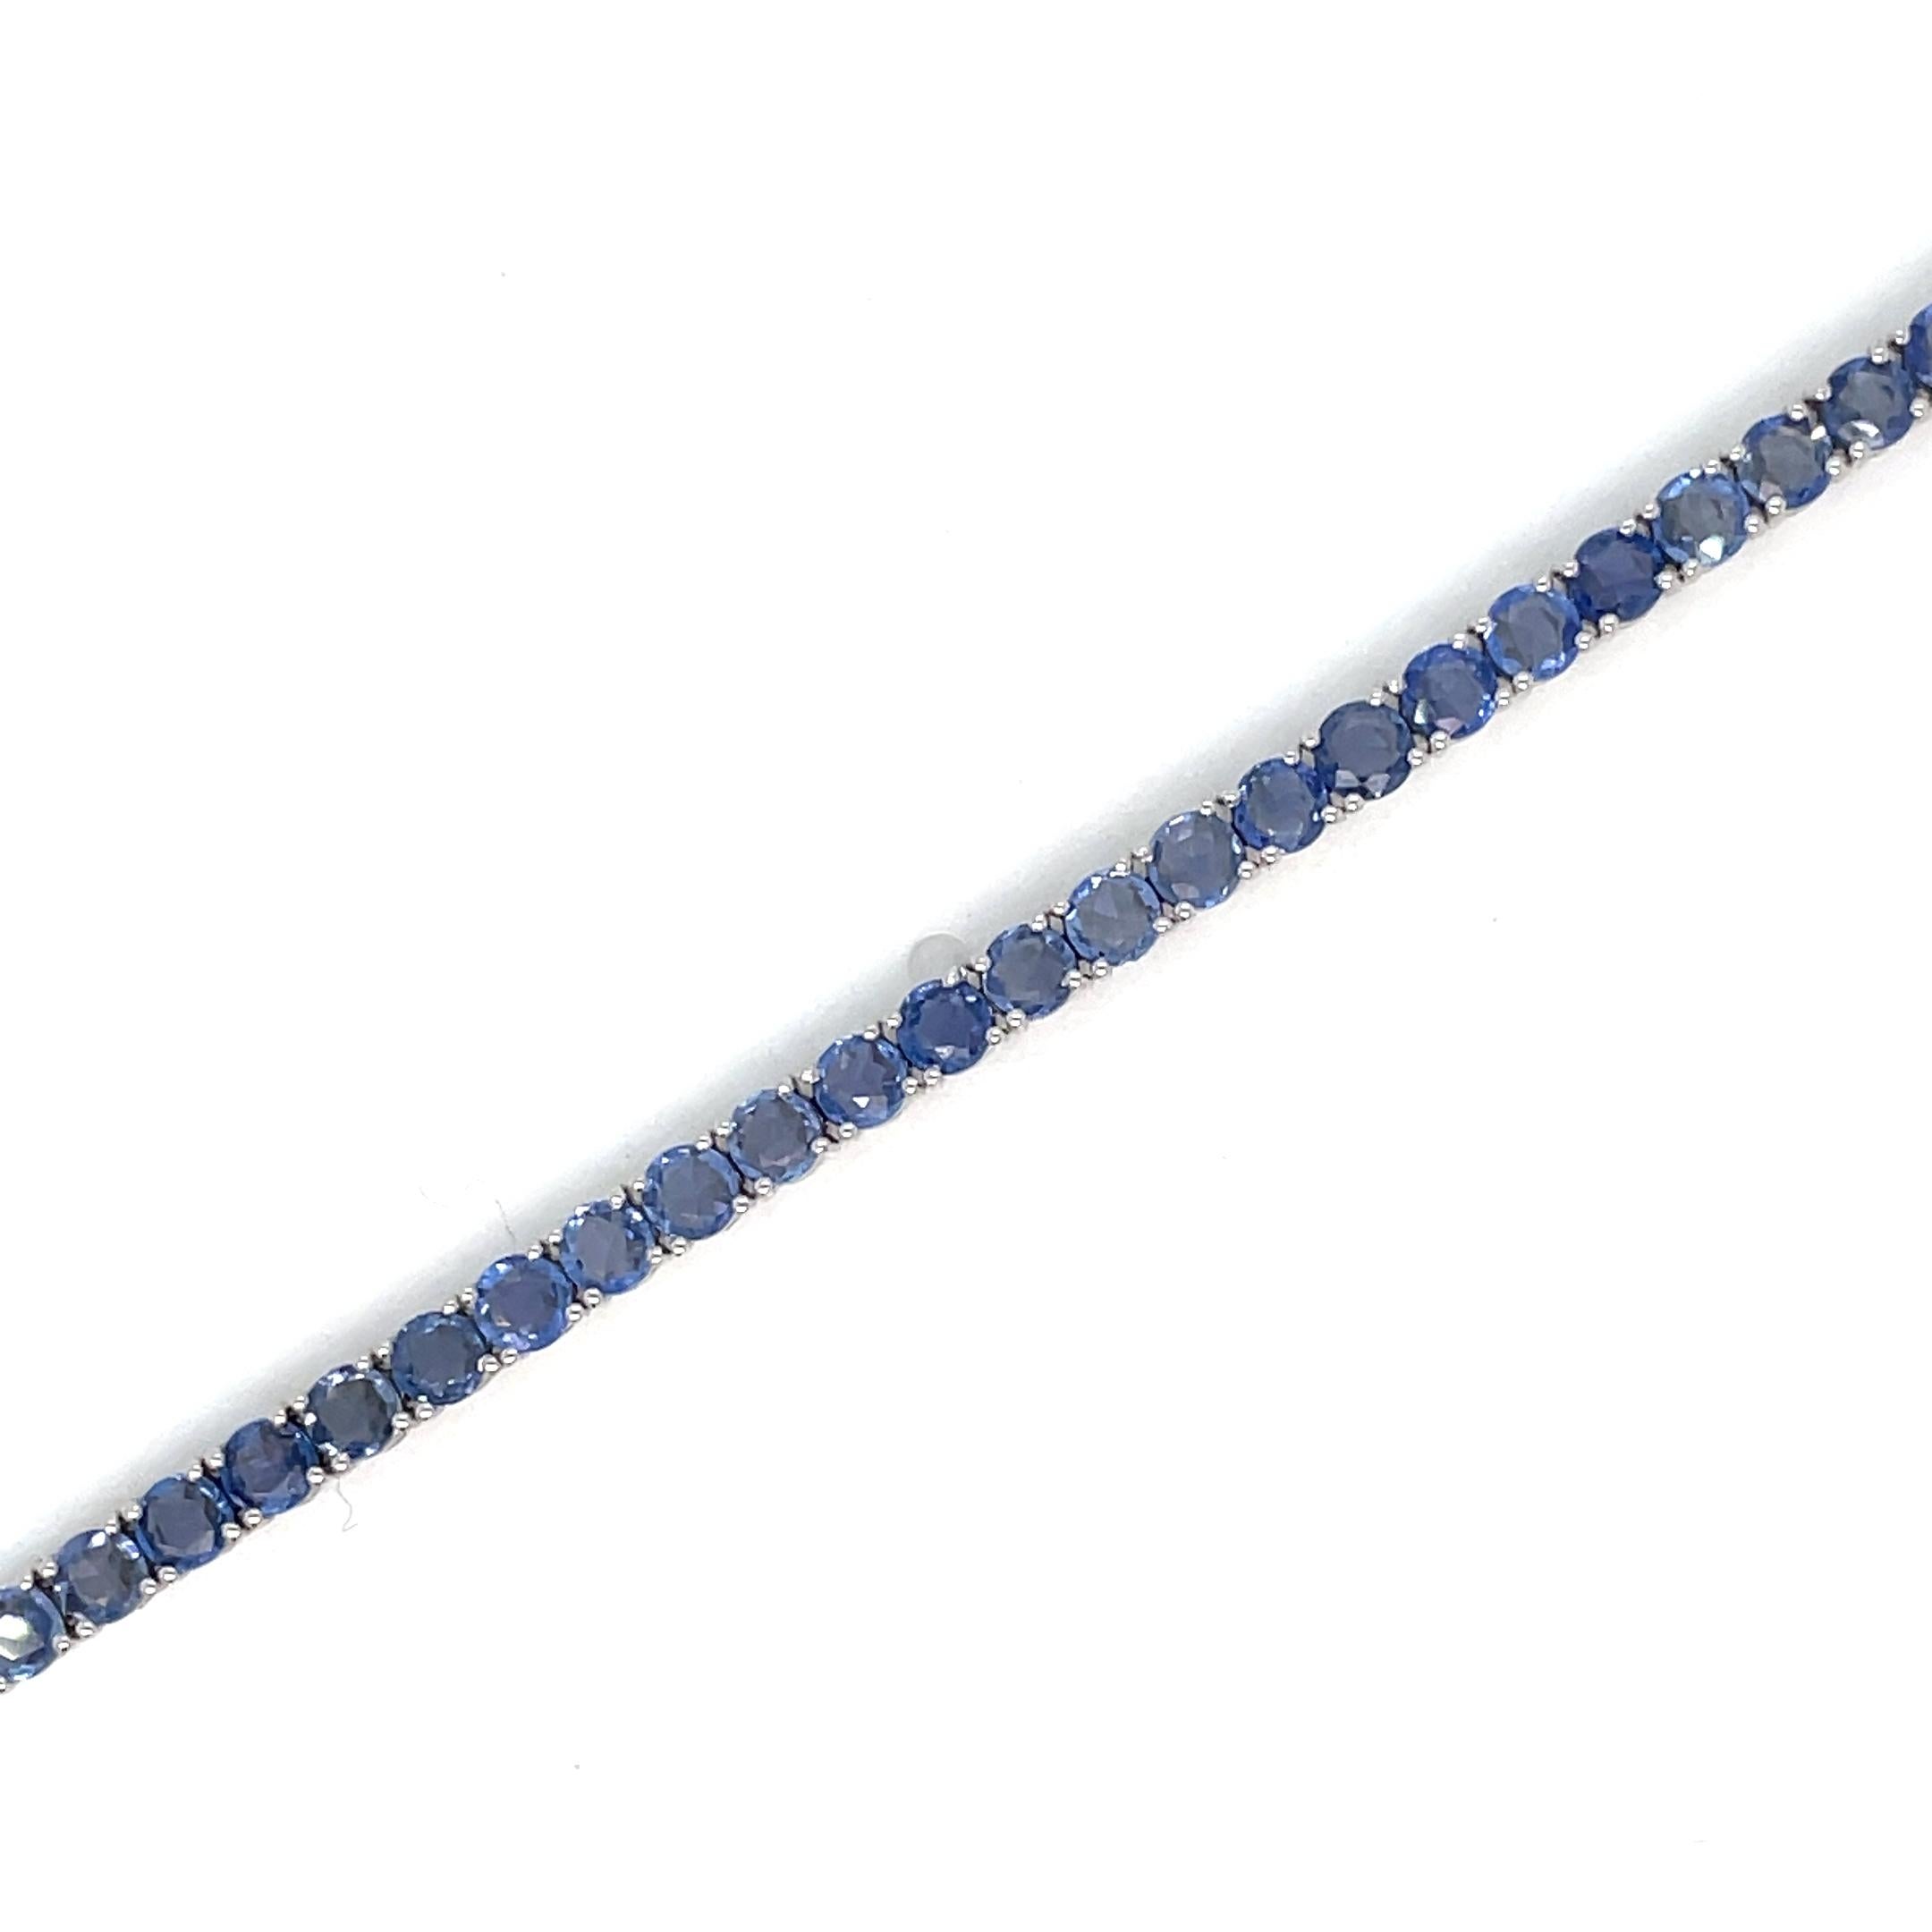 Fabulous important brand new bracelet made in solid 9 kt white gold and set with 6,90 Carats of vivid rose cut Natural Blu Sapphires, weighing 0.12 carat each (3,0 mm).
This piece is designed and crafted in our laboratories, thanks to old techniques